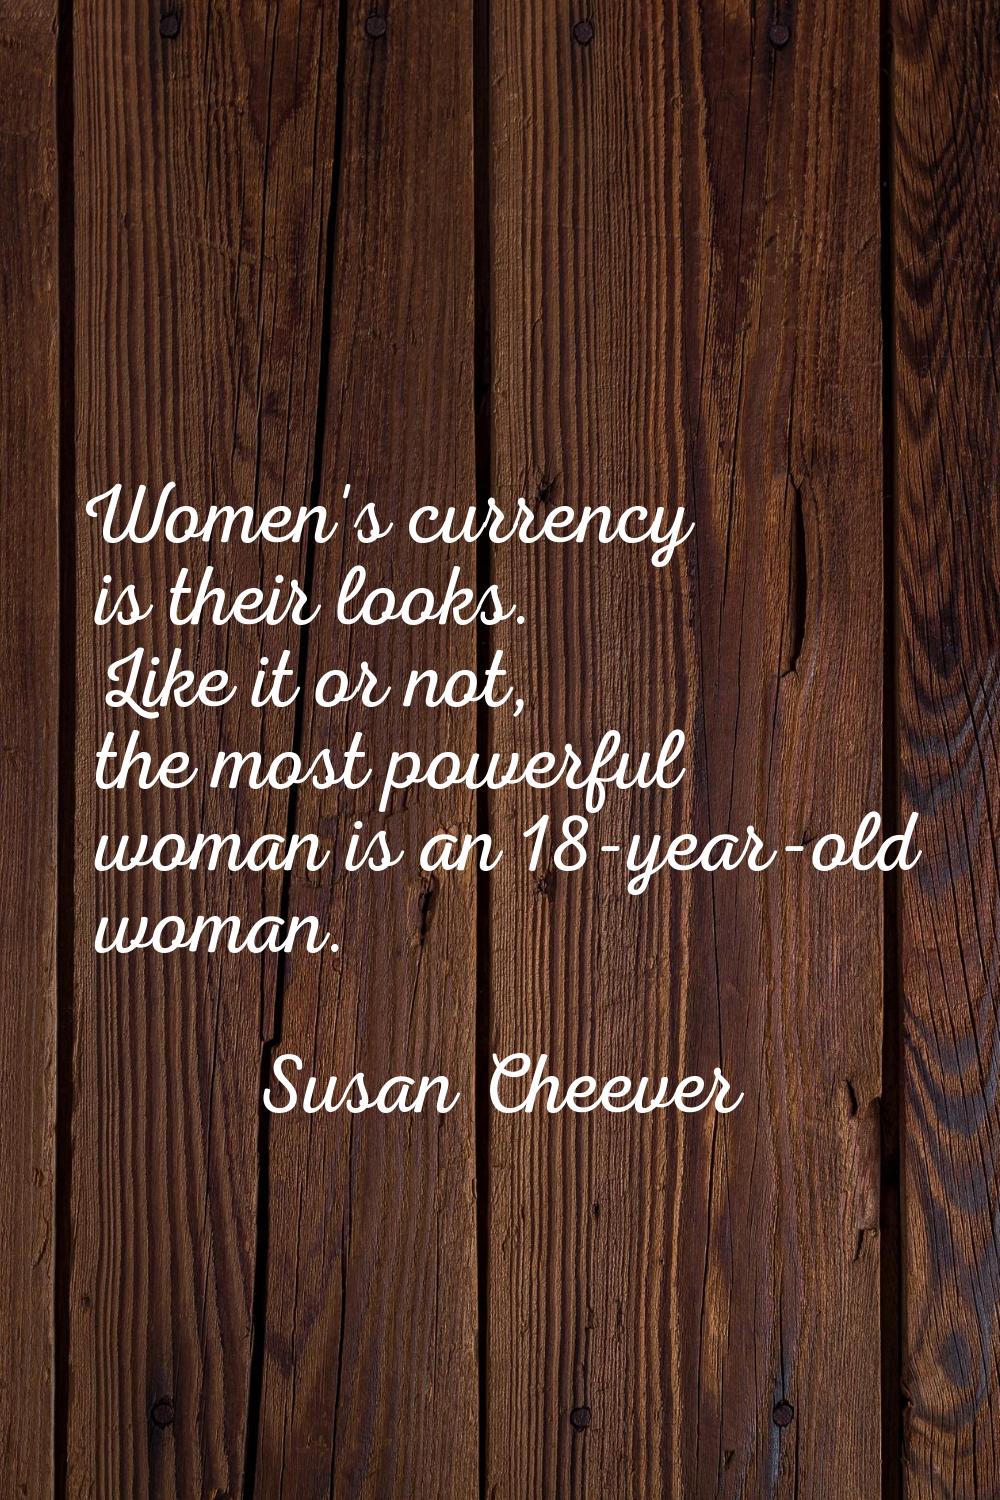 Women's currency is their looks. Like it or not, the most powerful woman is an 18-year-old woman.